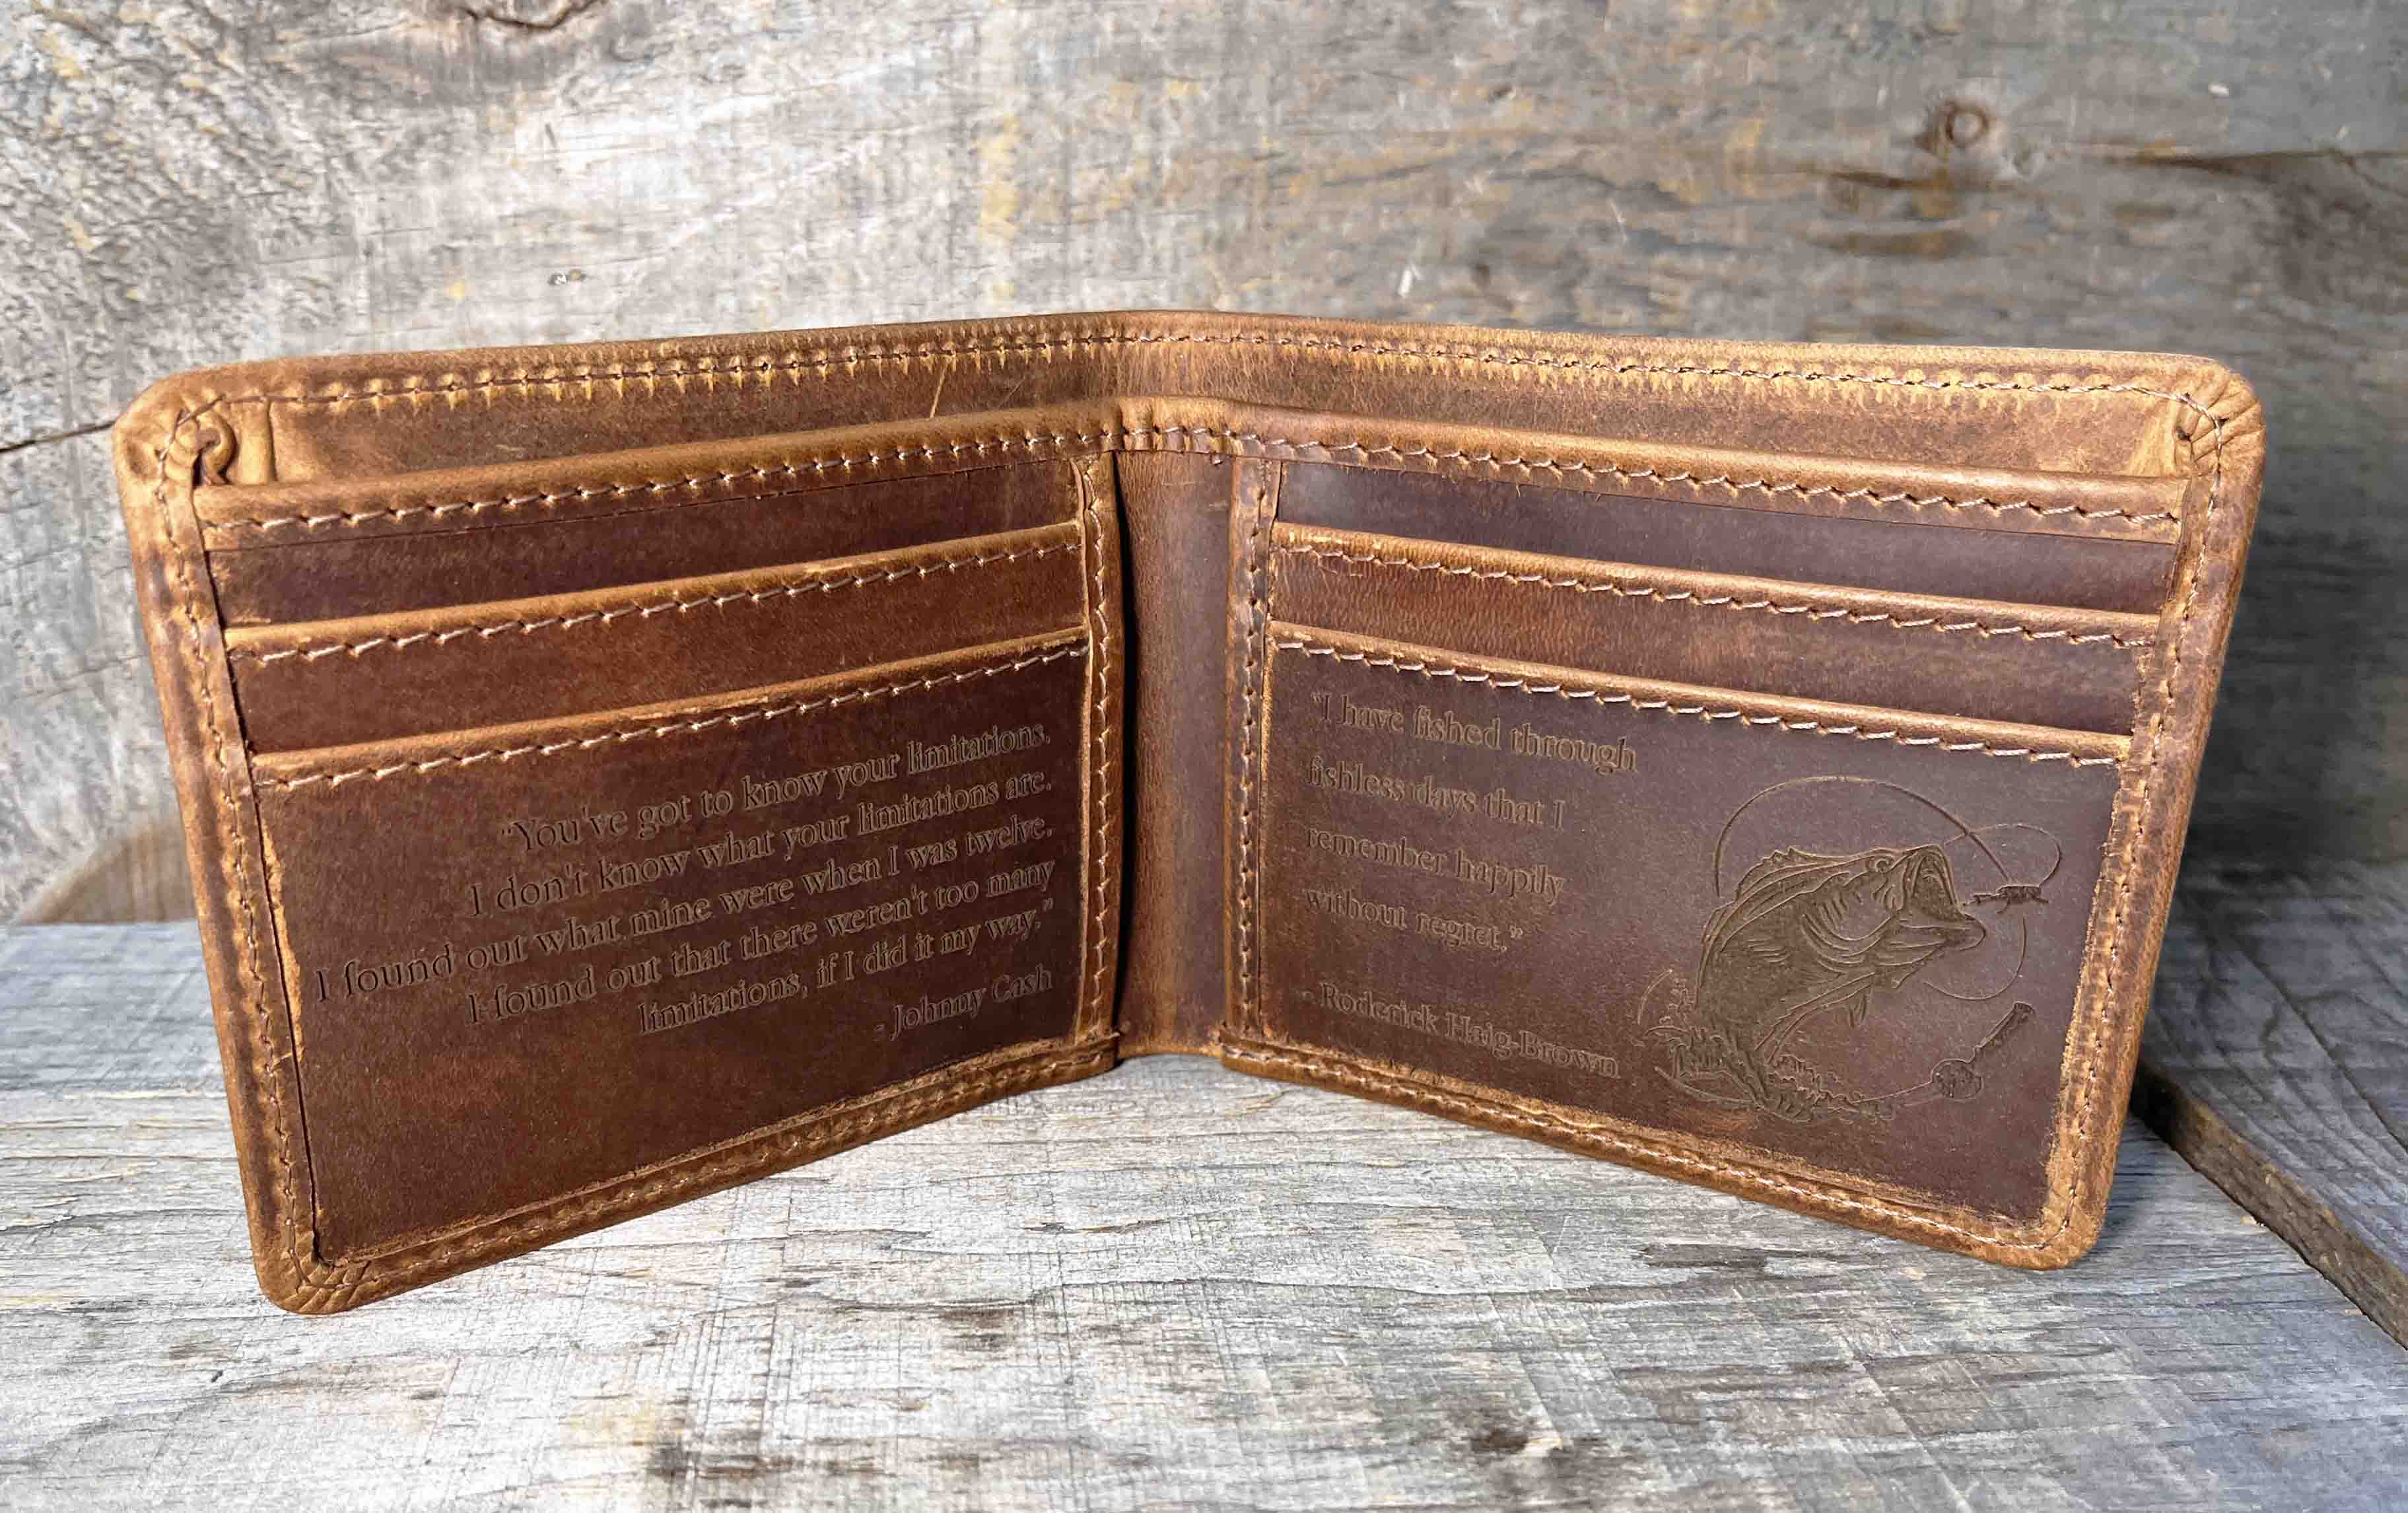 Wallet Bi-Fold Premium Leather Engraved With Inner Slots for Cards